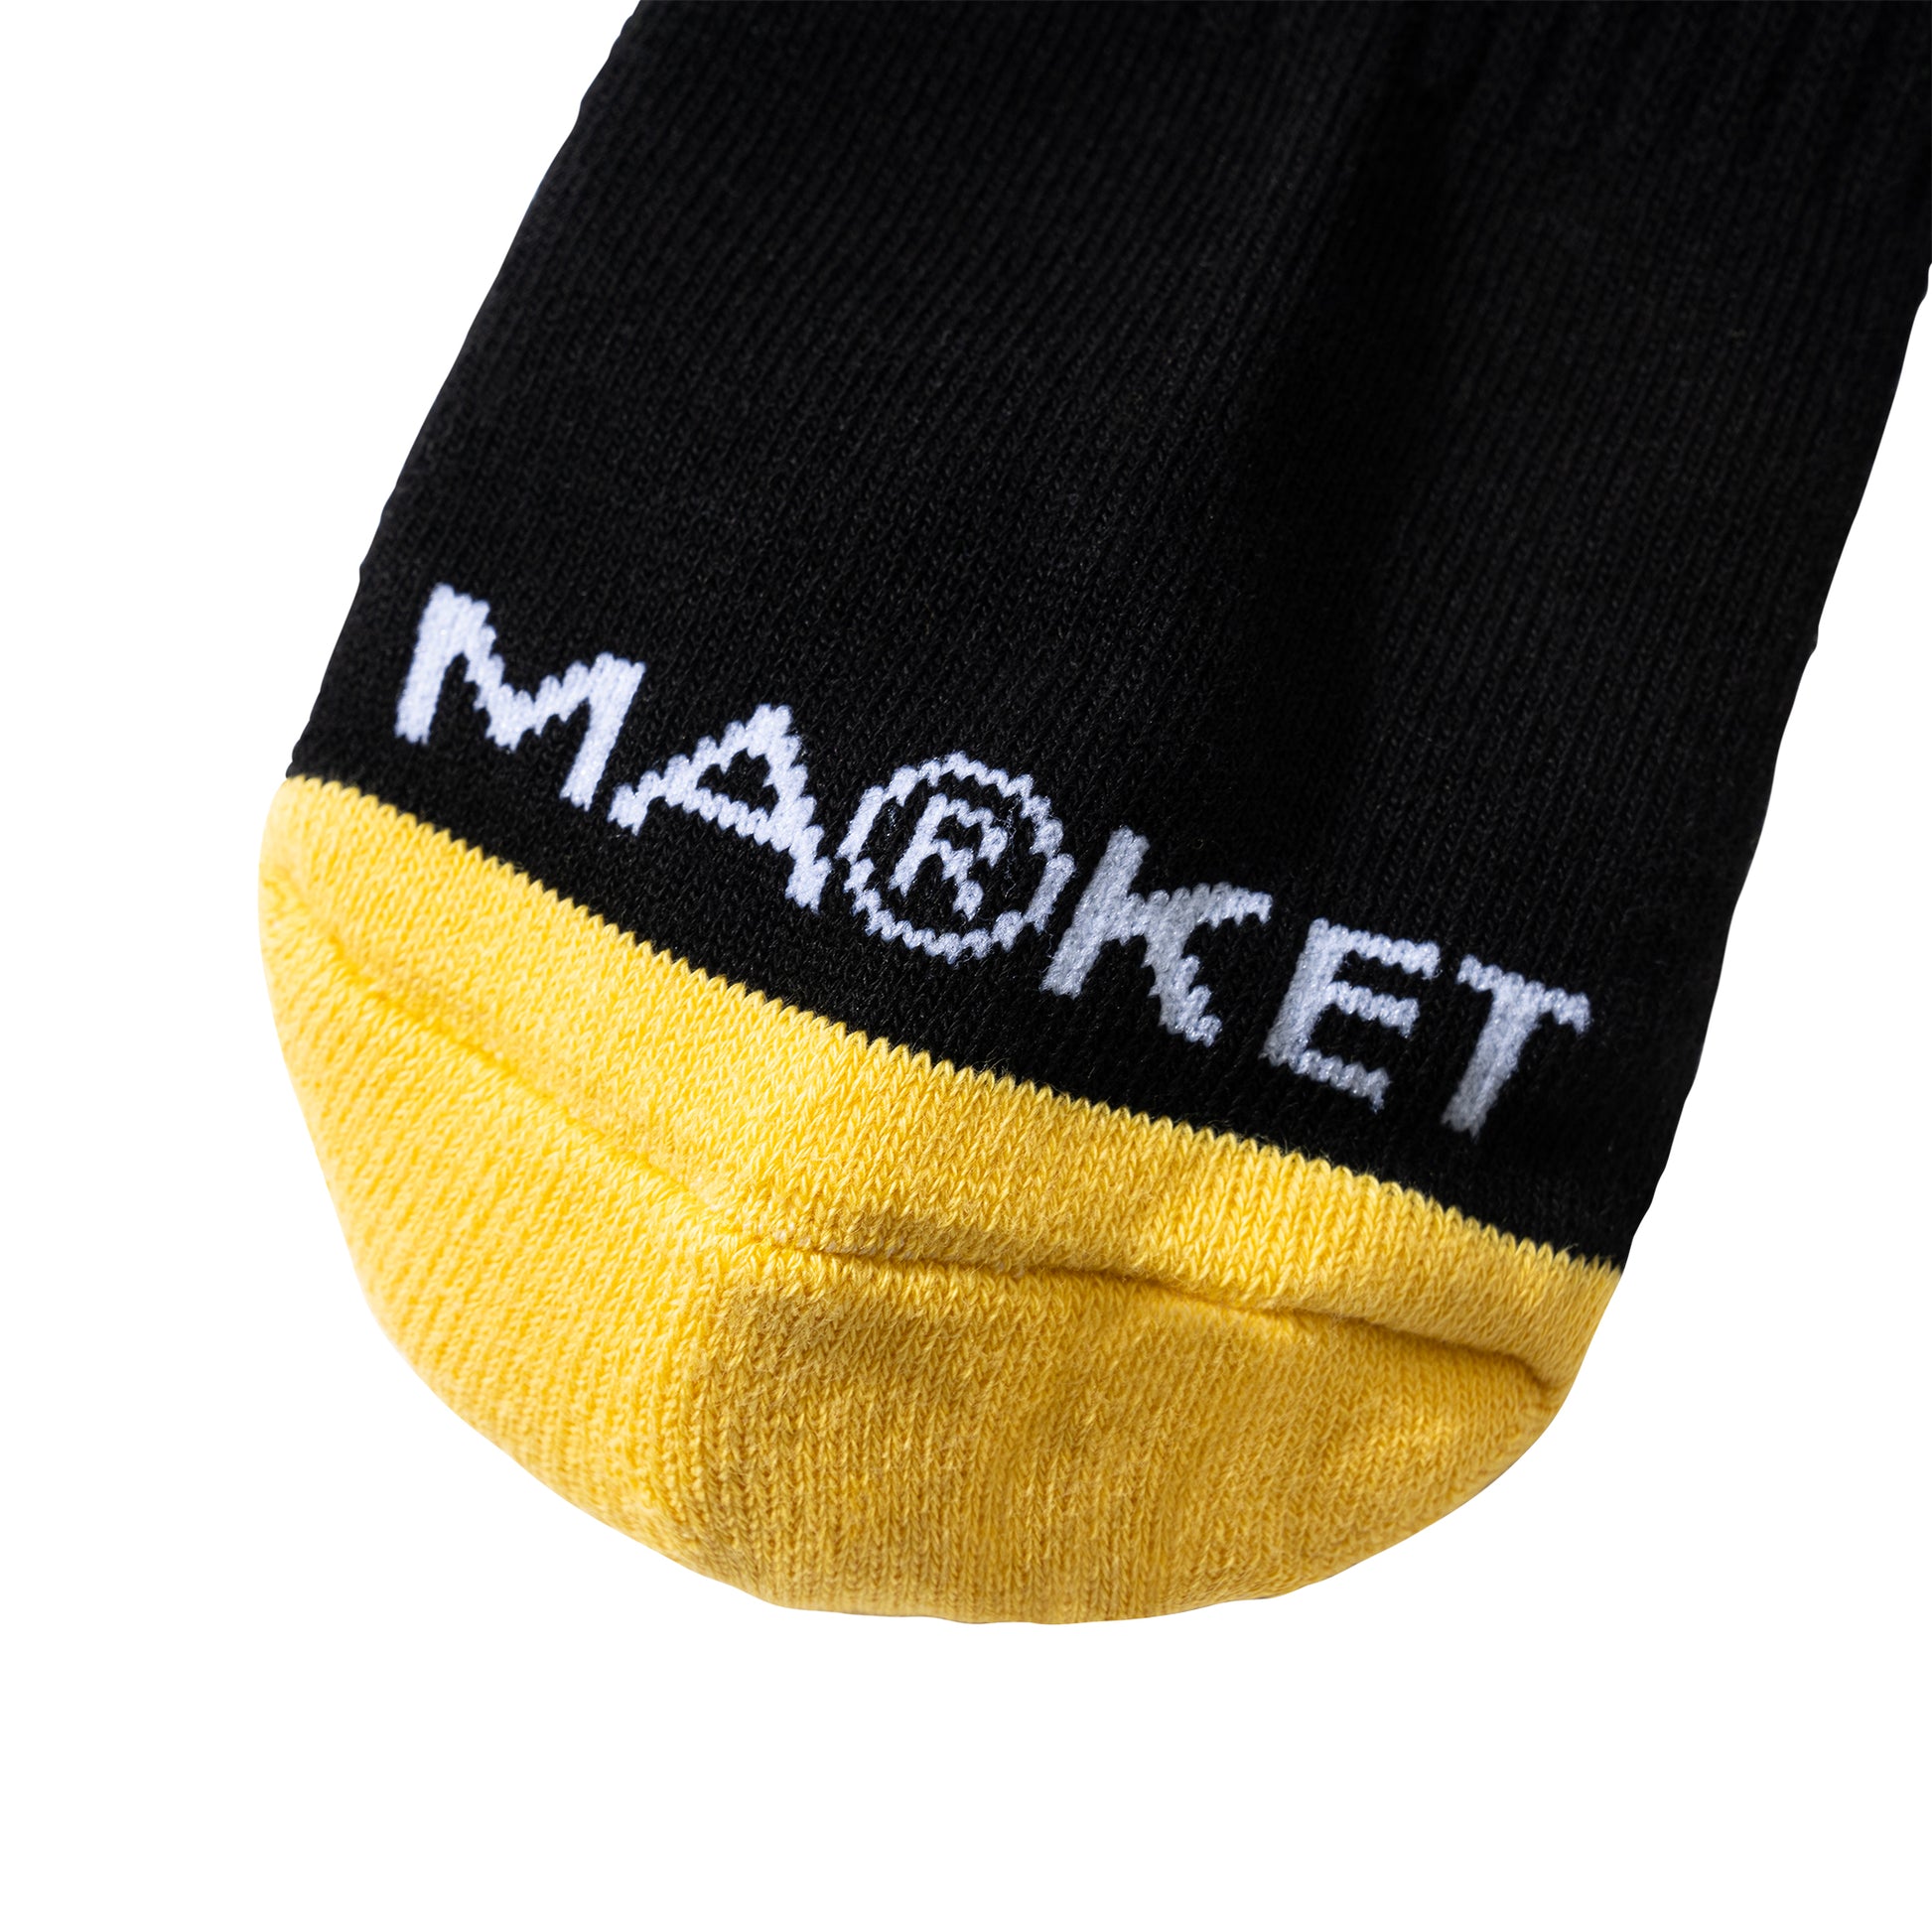 MARKET clothing brand SMILEY SUNRISE SOCKS. Find more graphic tees, socks, hats and small goods at MarketStudios.com. Formally Chinatown Market.